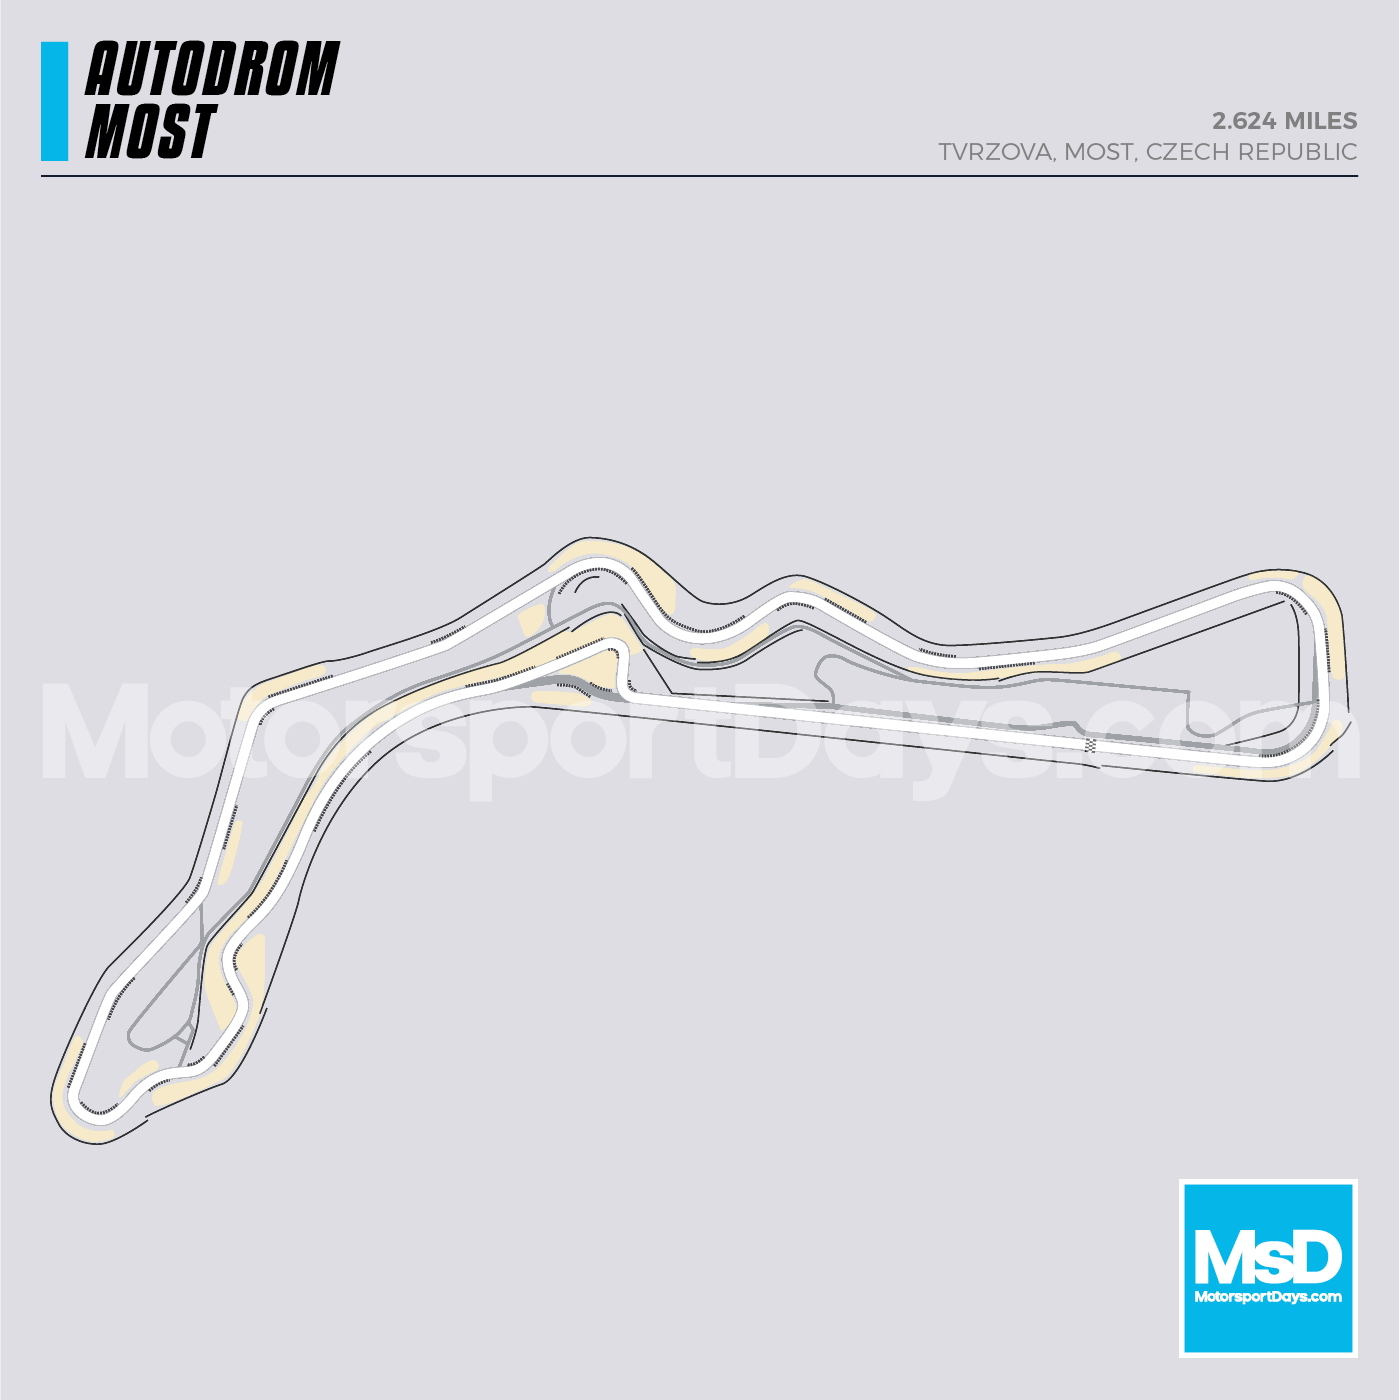 Most-Circuit-track-map